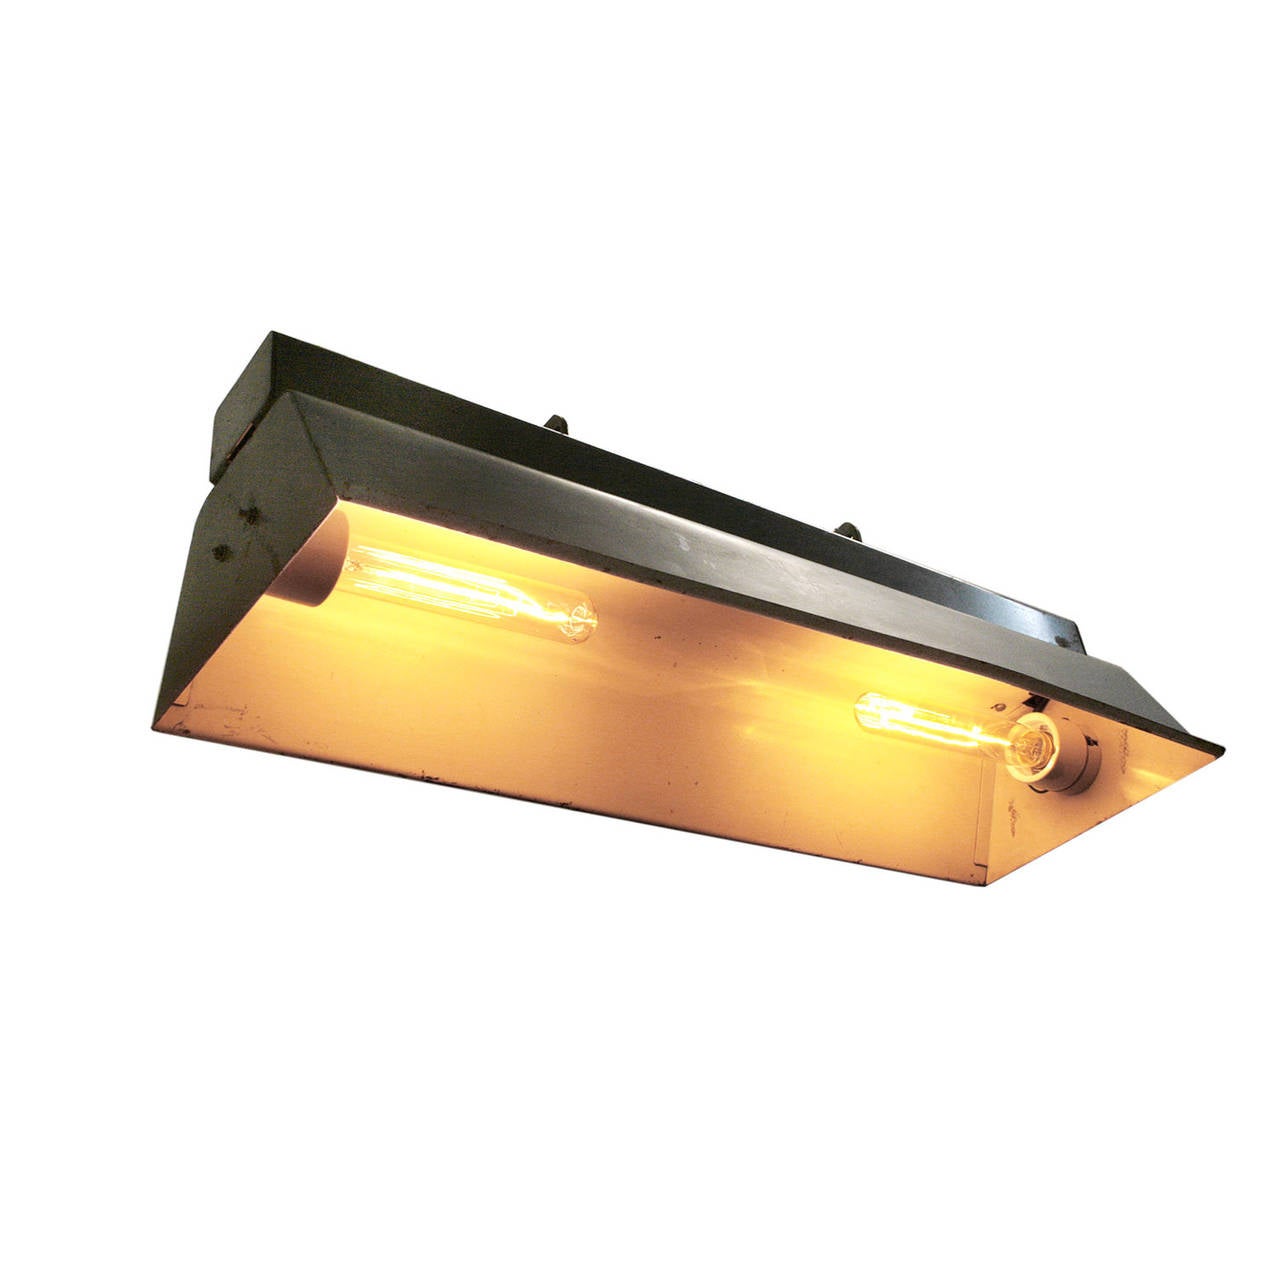 Rectangular Industrial pendant with two porcelain bulb holders on each side. switch on top. Weight | 3.0 kg / 6.6 lb.

All lamps have been made suitable by international standards for incandescent light bulbs, energy-efficient and LED bulbs with